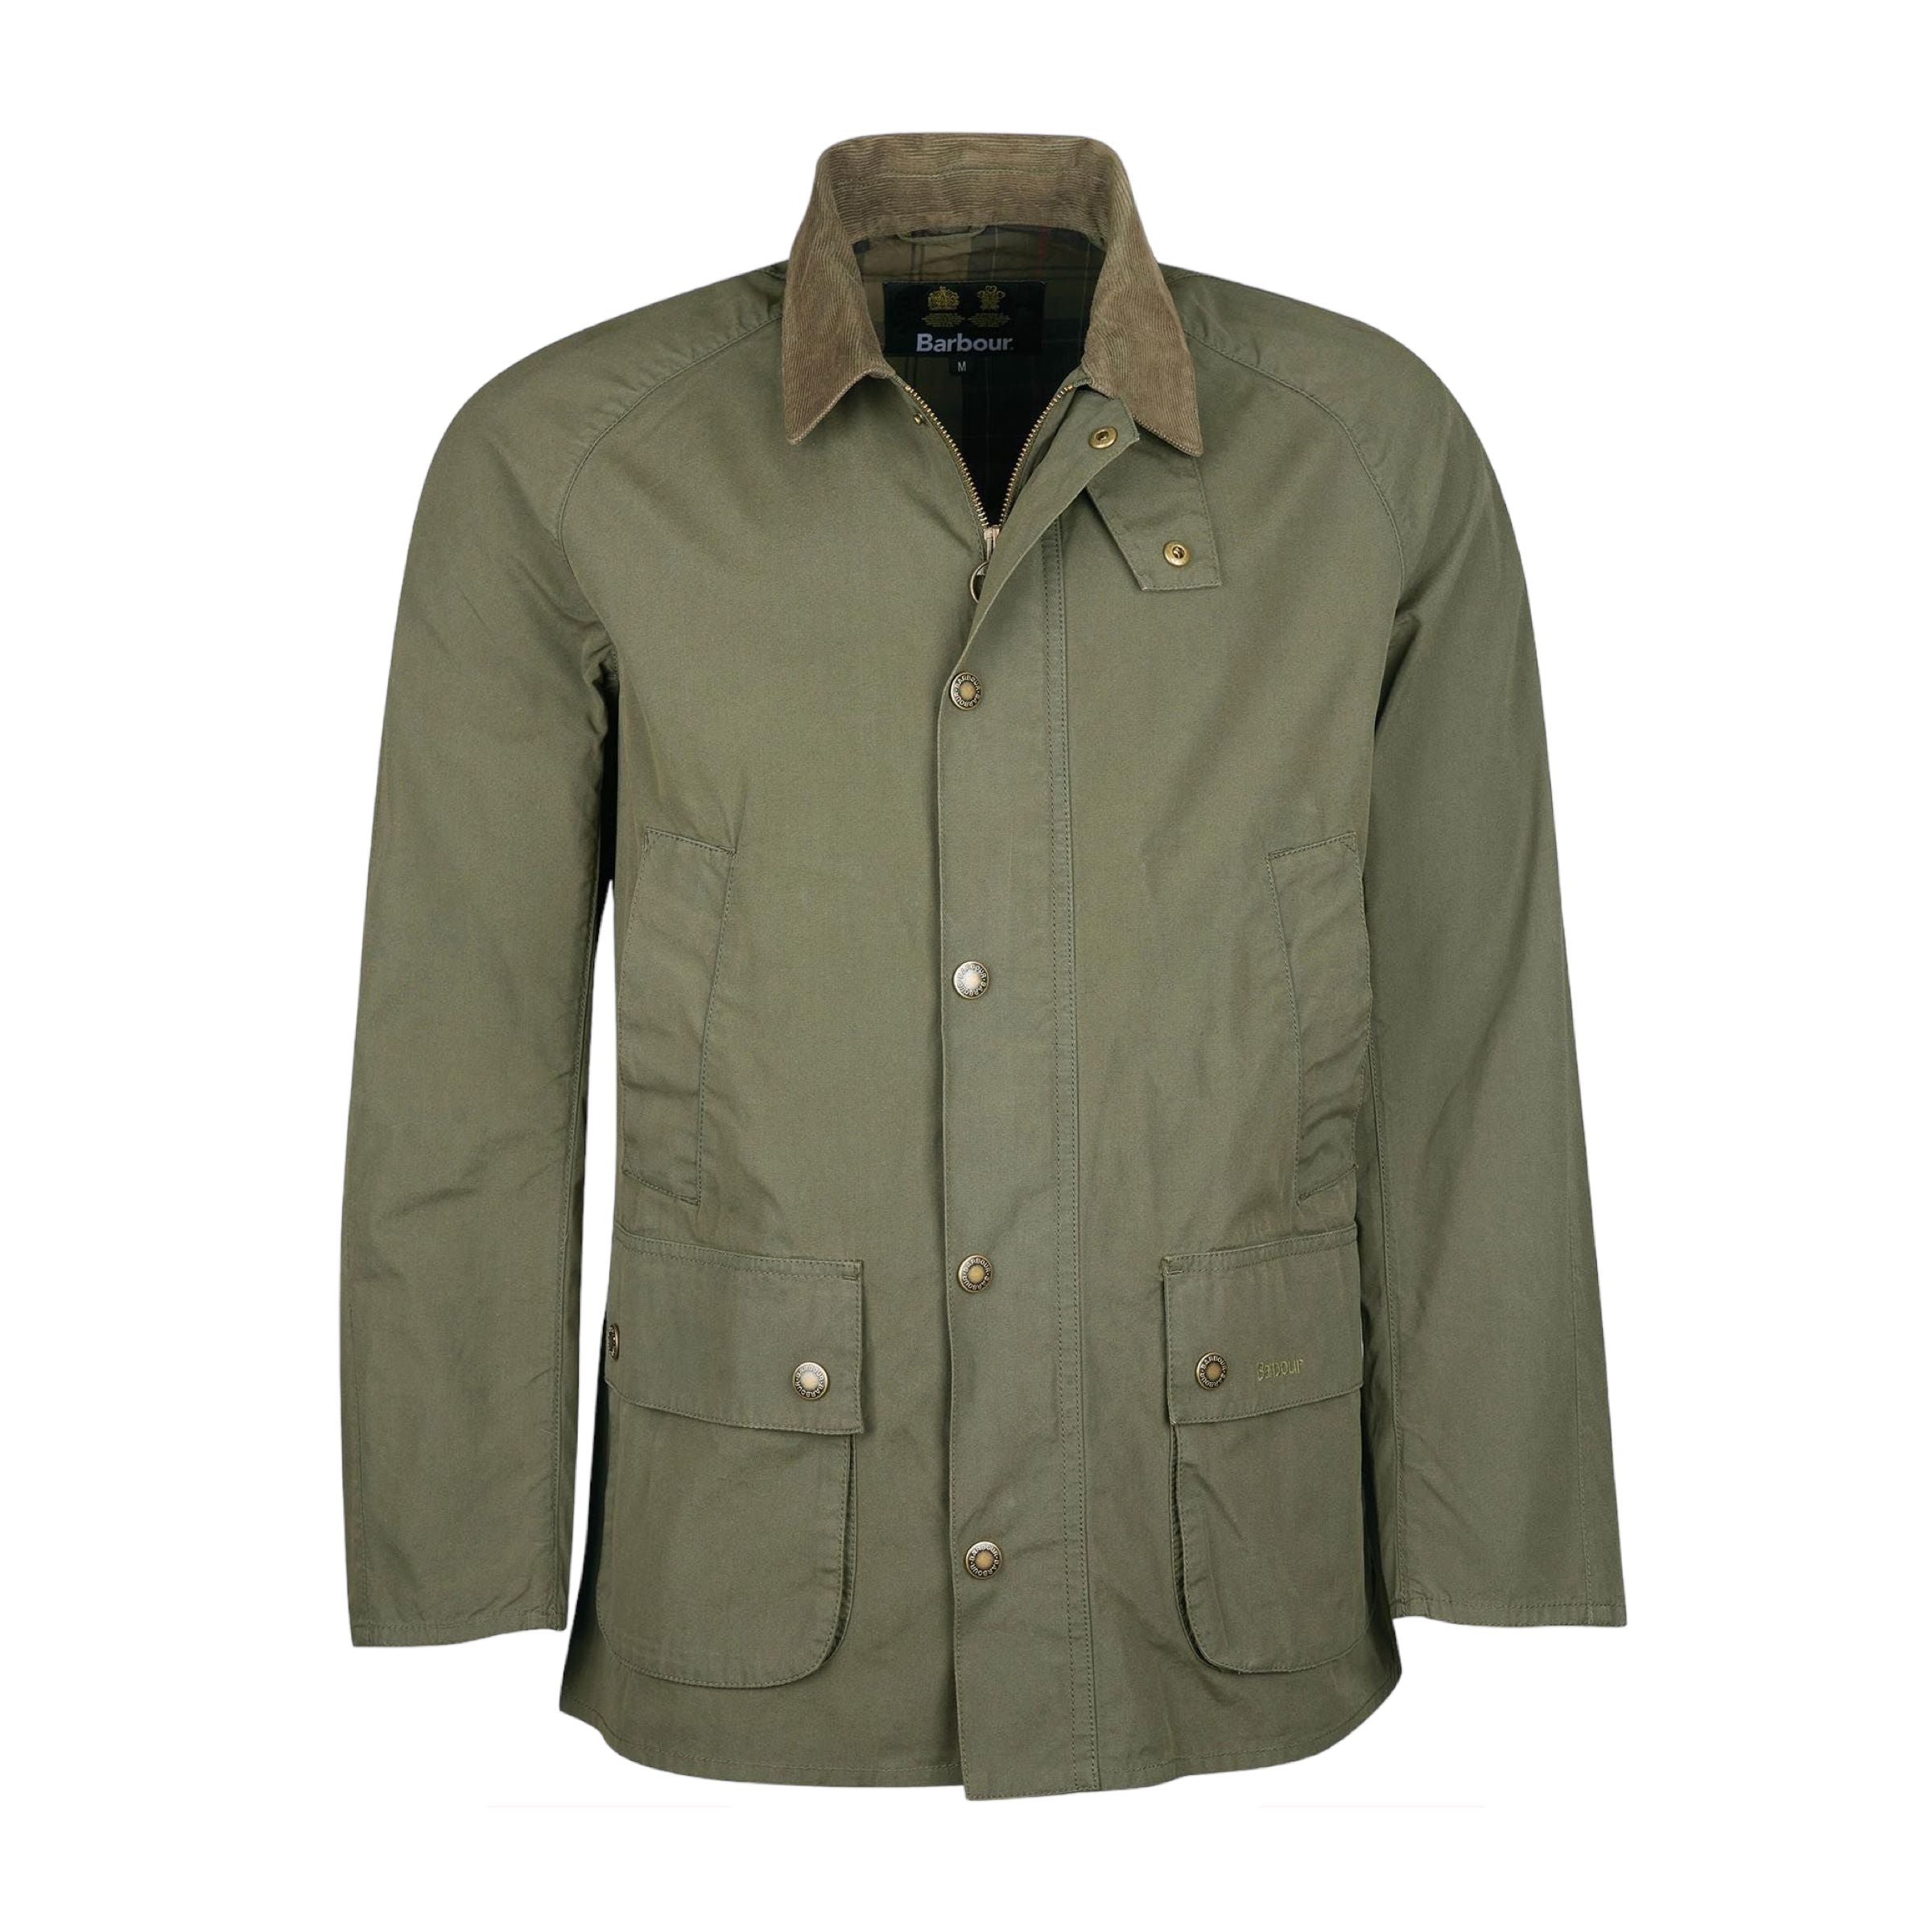 Giacca Ashby Casual Uomo Olive